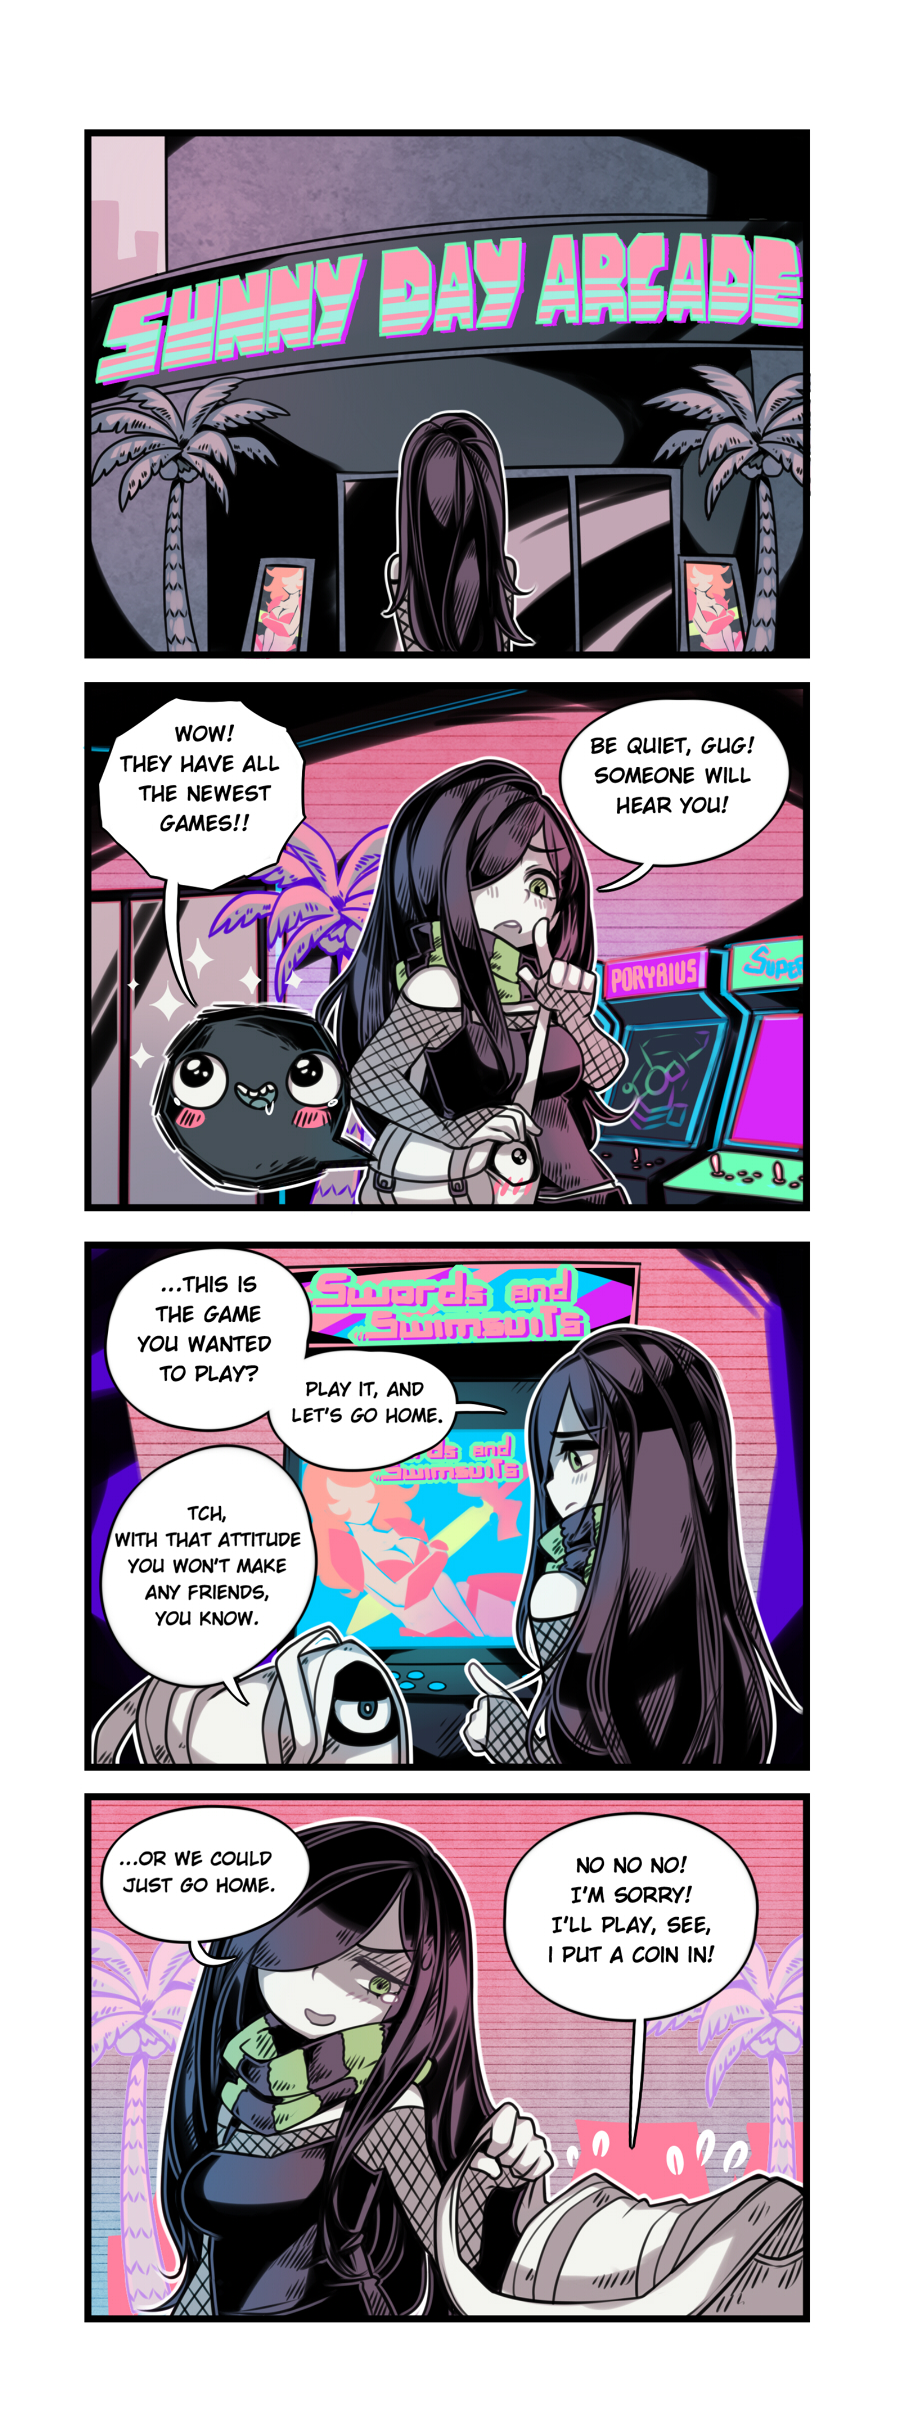 The Crawling City - 13 Sunny Day Arcade part 1